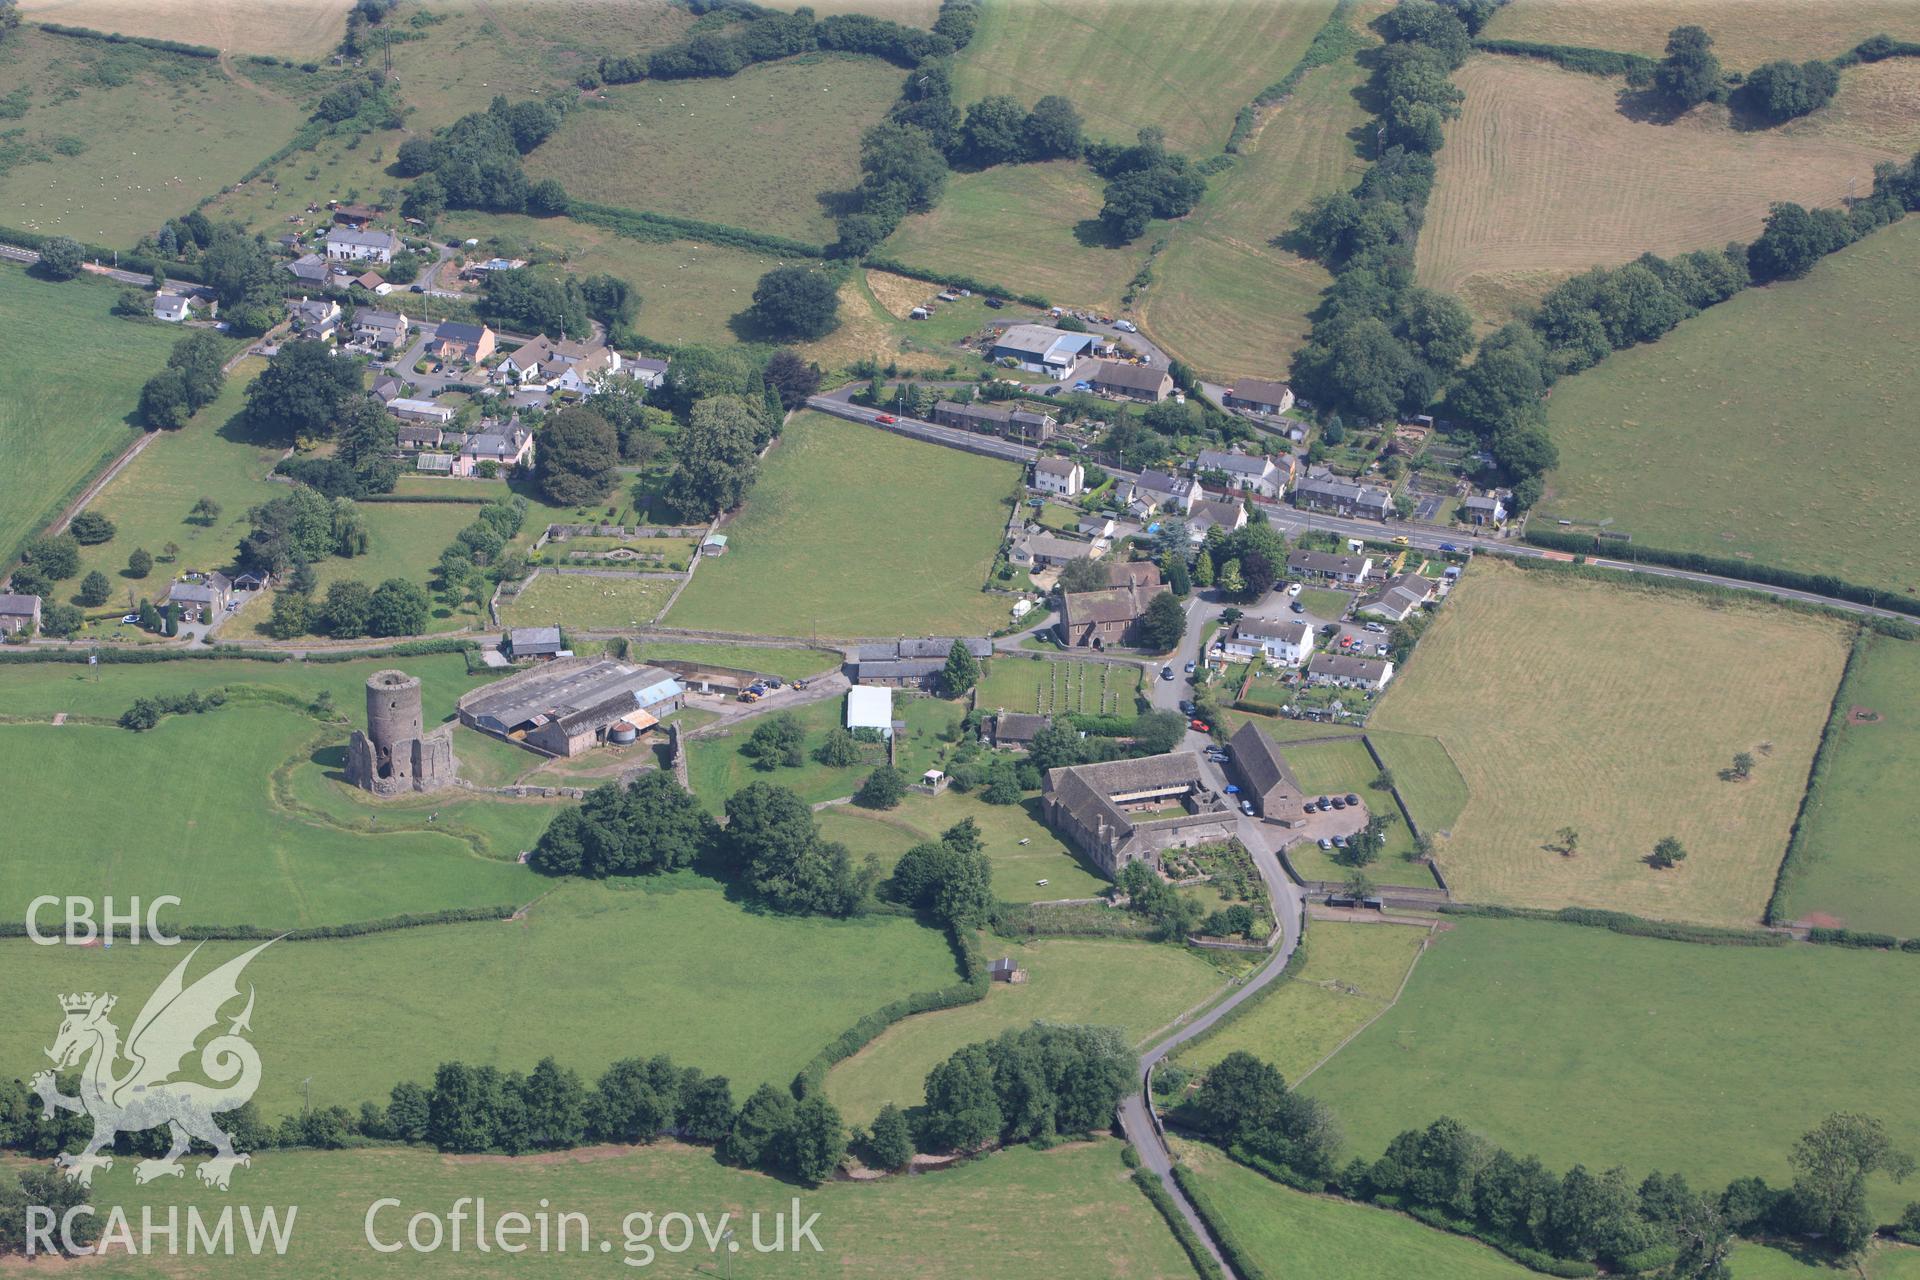 St. John's church; Tretower Shrunken Settlement; Tretower Castle, Court and Court Barn and Ty Llys Farm, Tretower, between Abergavenny and Brecon. Oblique aerial photograph taken during Royal Commission?s programme of archaeological aerial reconnaissance